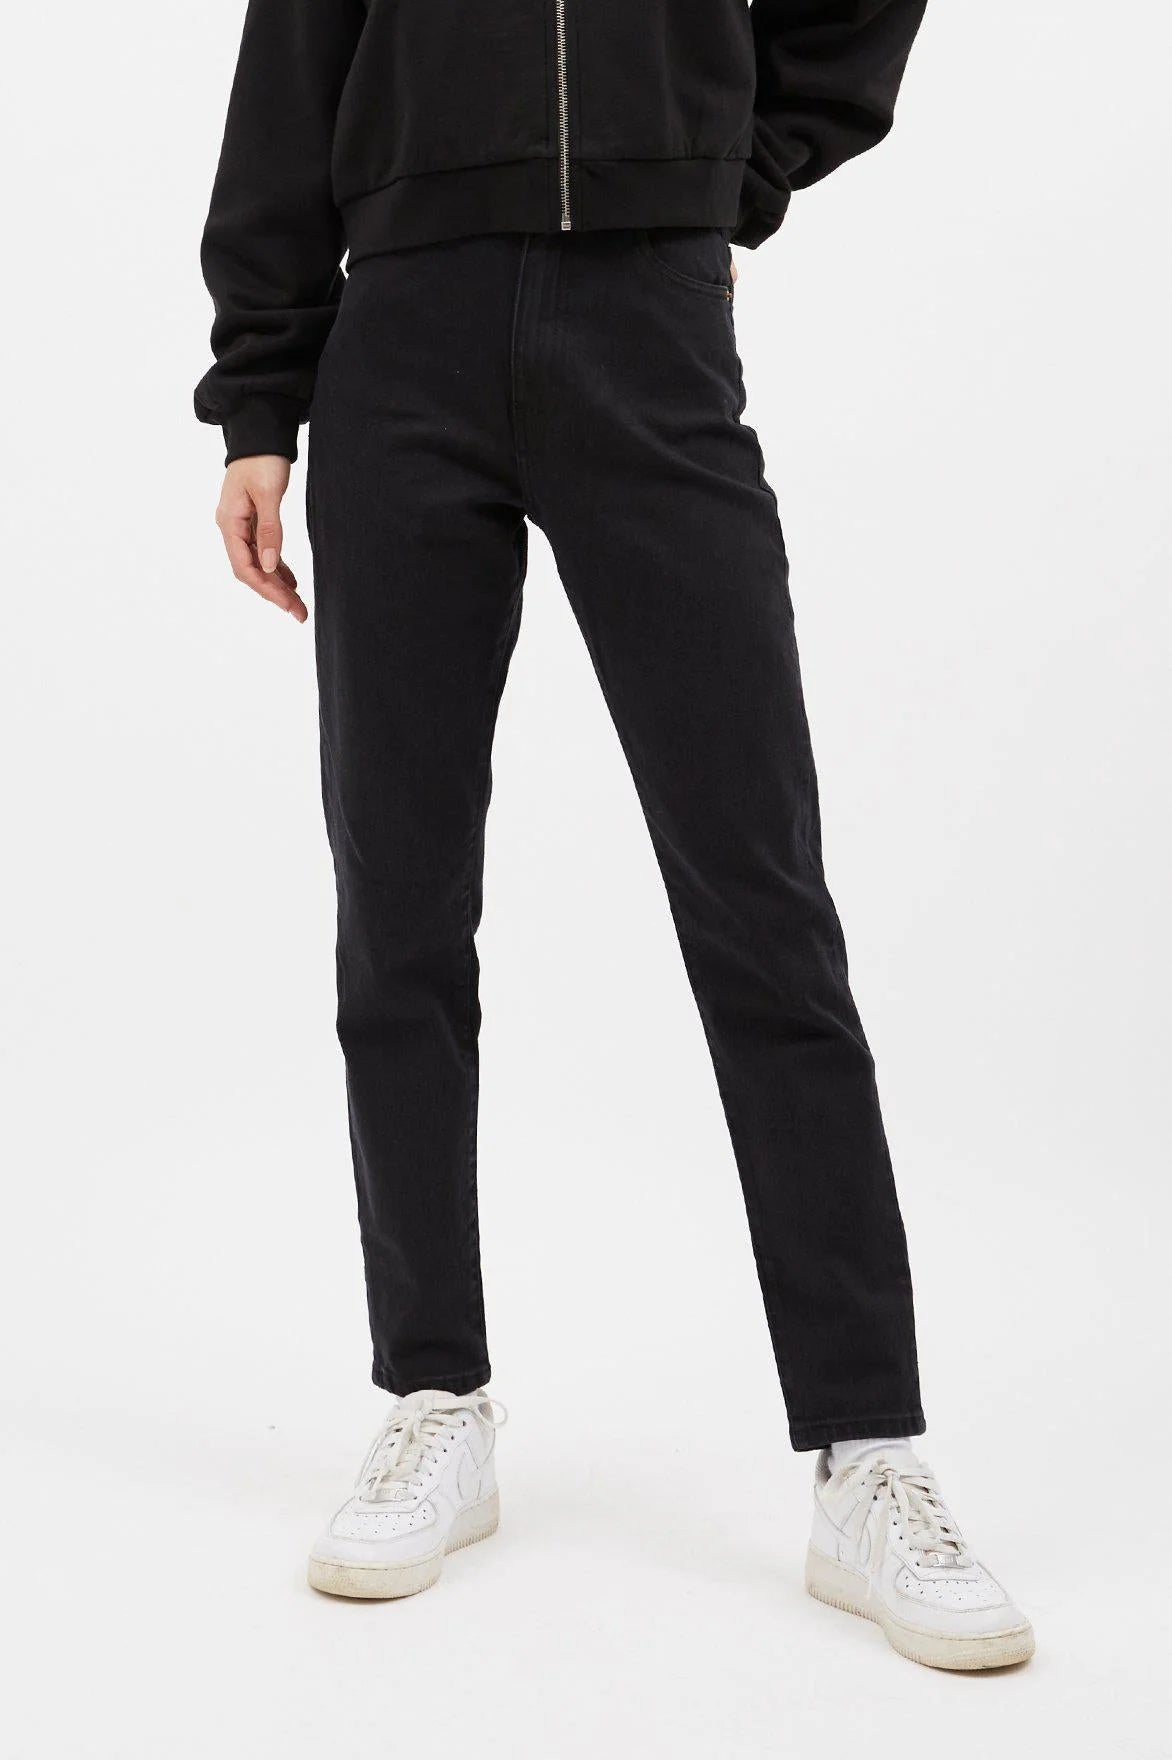 Nora Jeans, Washed Black Stretch